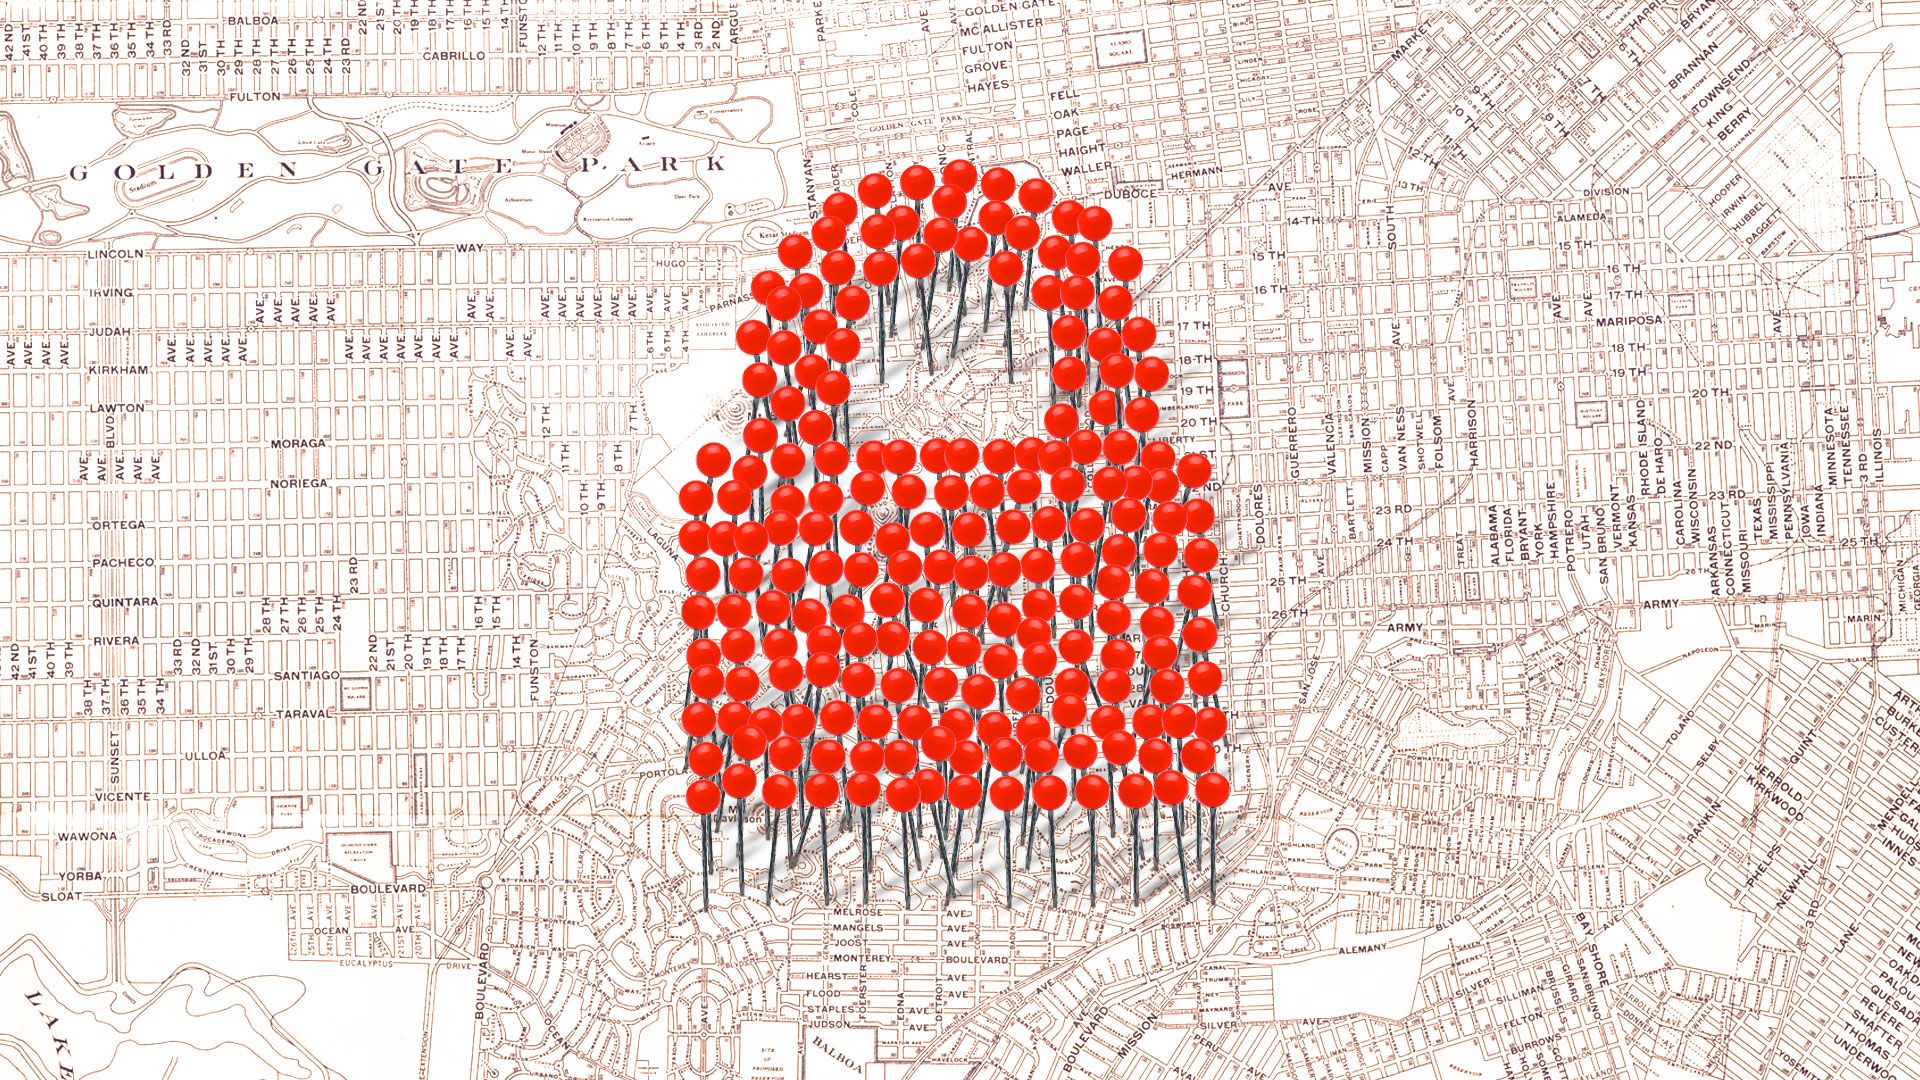 Illustration of a lock formed by red pushpins on an antique map of San Francisco